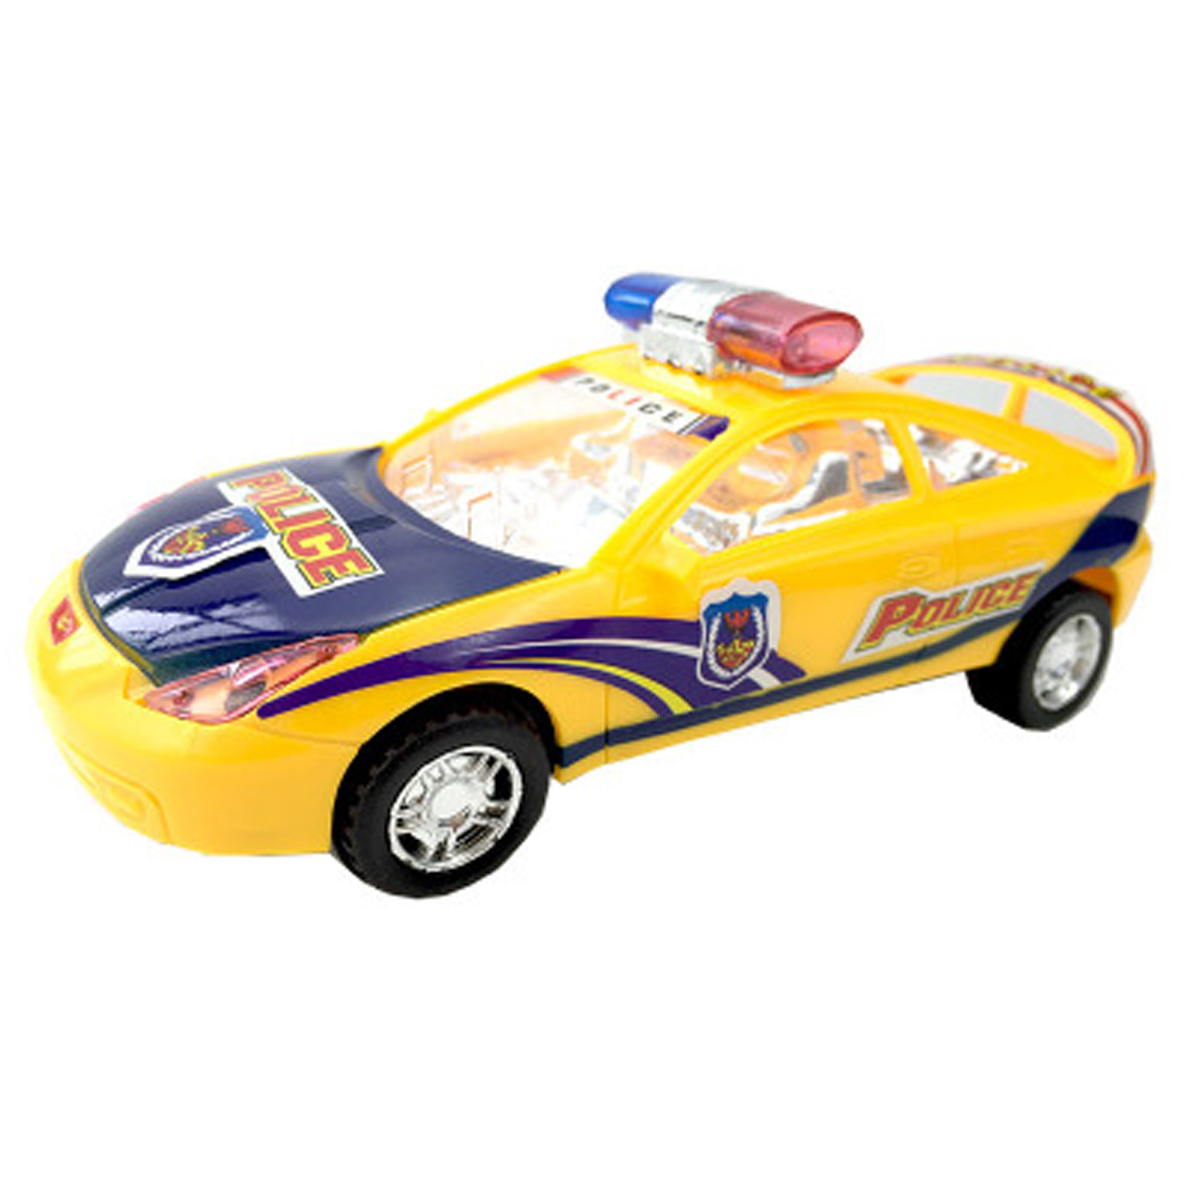 Childrens-Electric-Alloy-Simulation-Po-lice-Car-Diecast-Model-Toy-with-LED-Light-and-Music-1604579-7